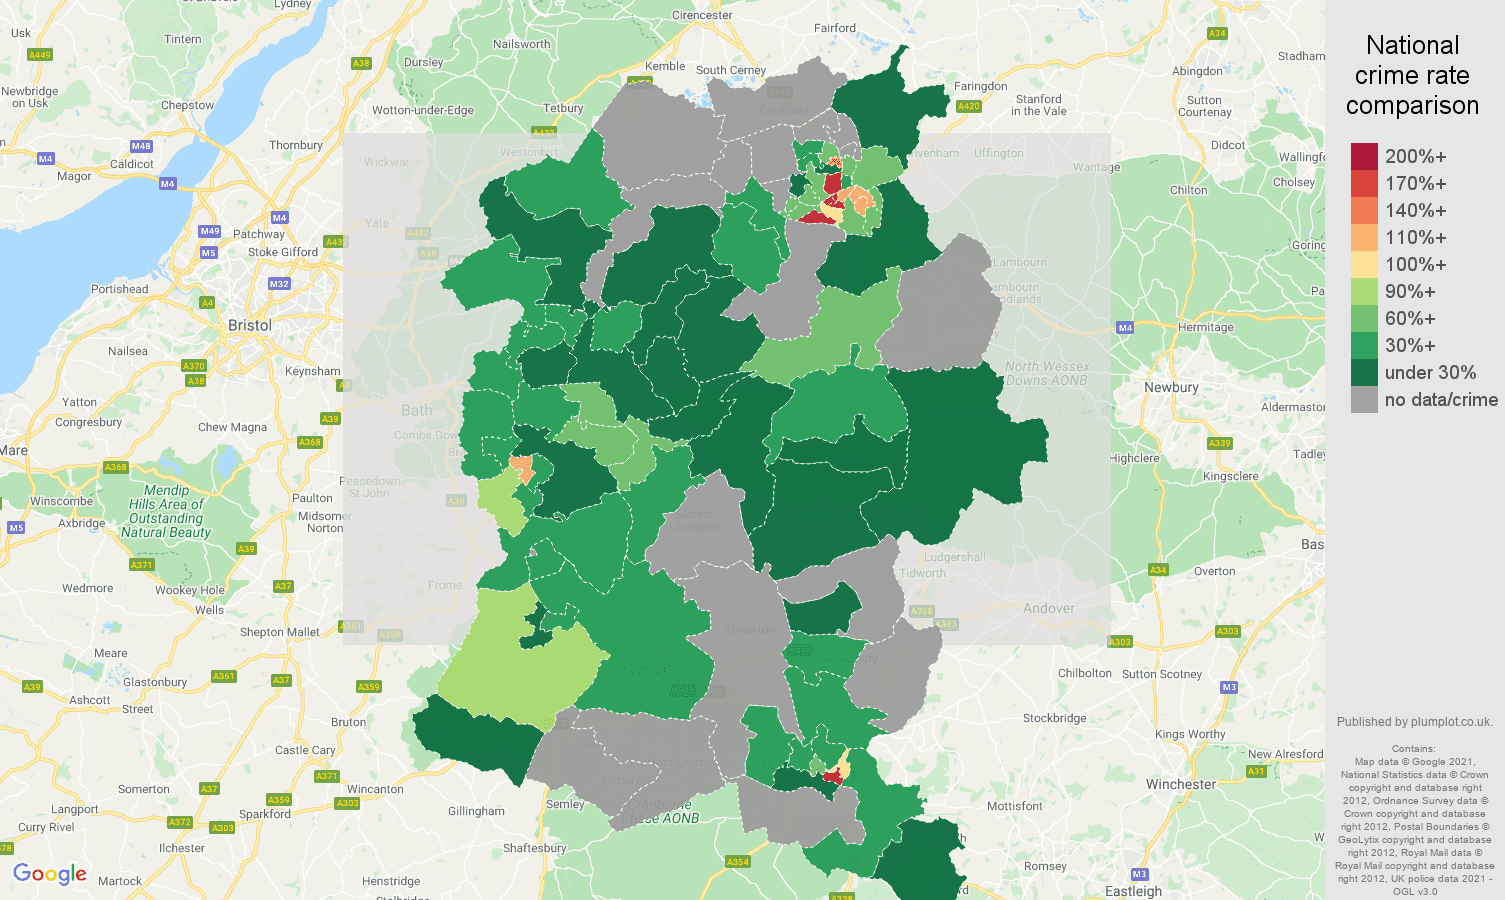 Wiltshire bicycle theft crime rate comparison map